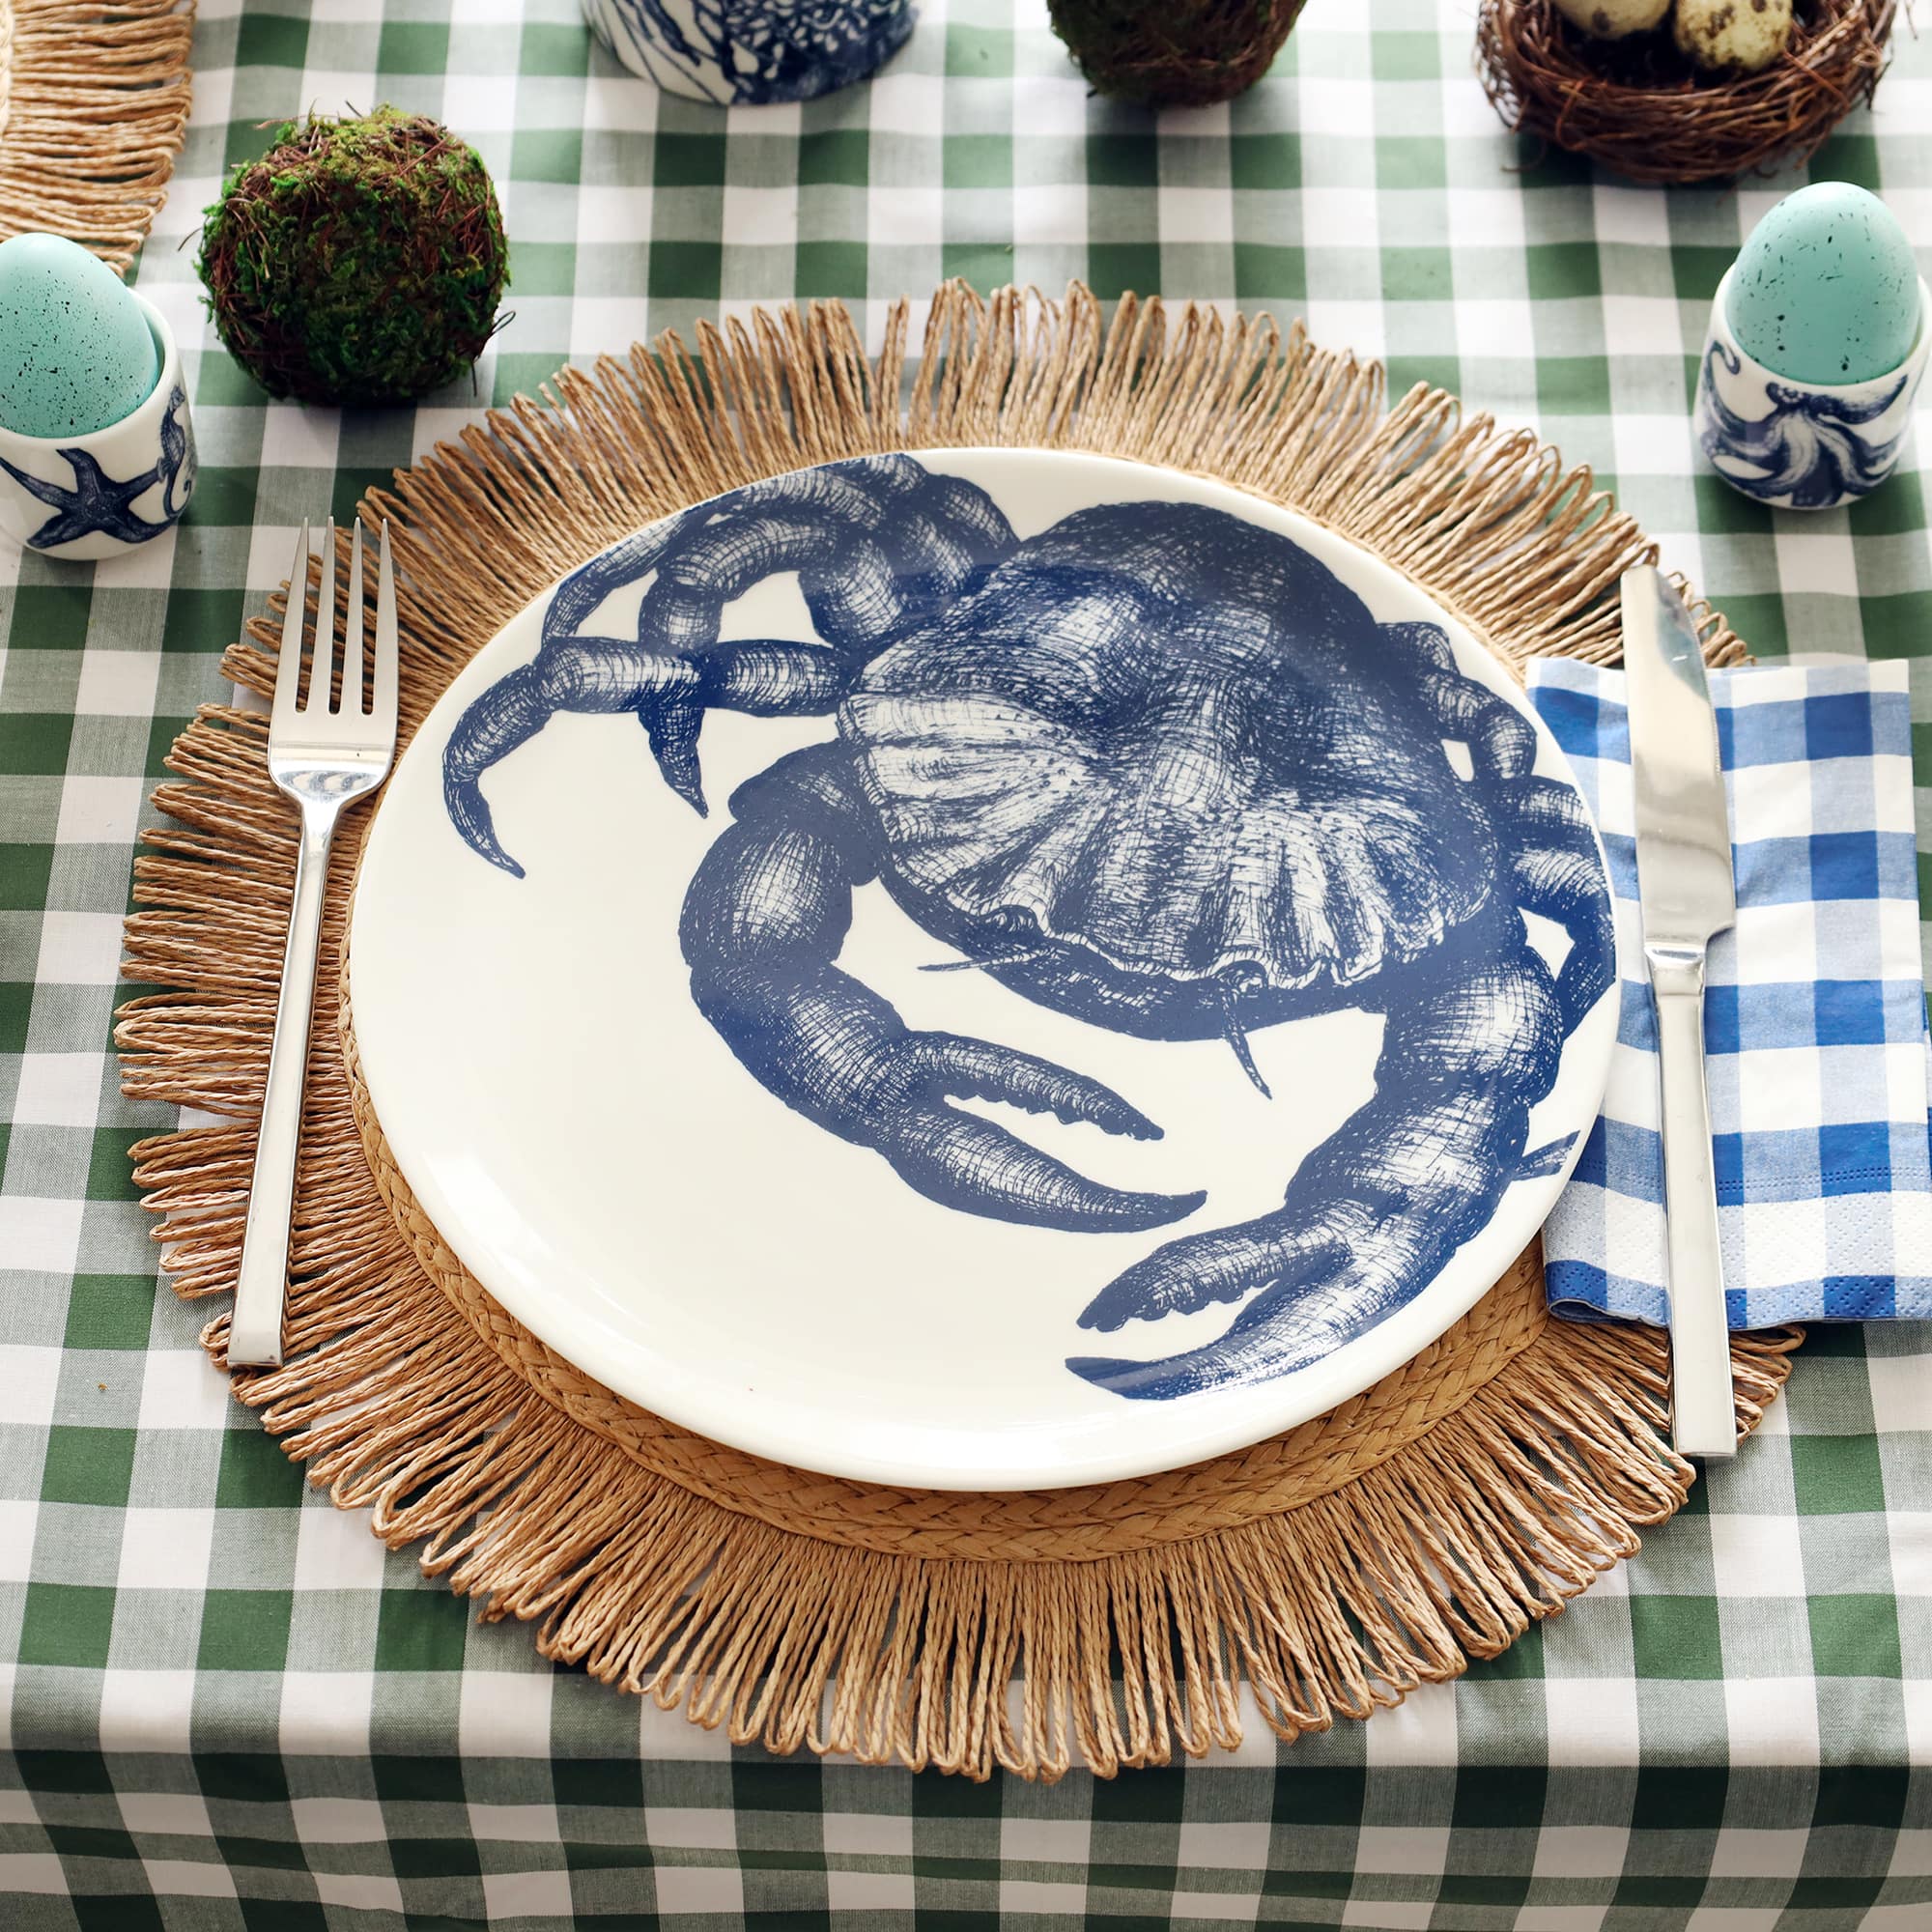 White bone china plate with navy crab illustration sitting on a raffia placemat and set for dinner with knife and fork either side. The table is laid for Easter with blue eggs in egg cups and moss ball to decoarate.